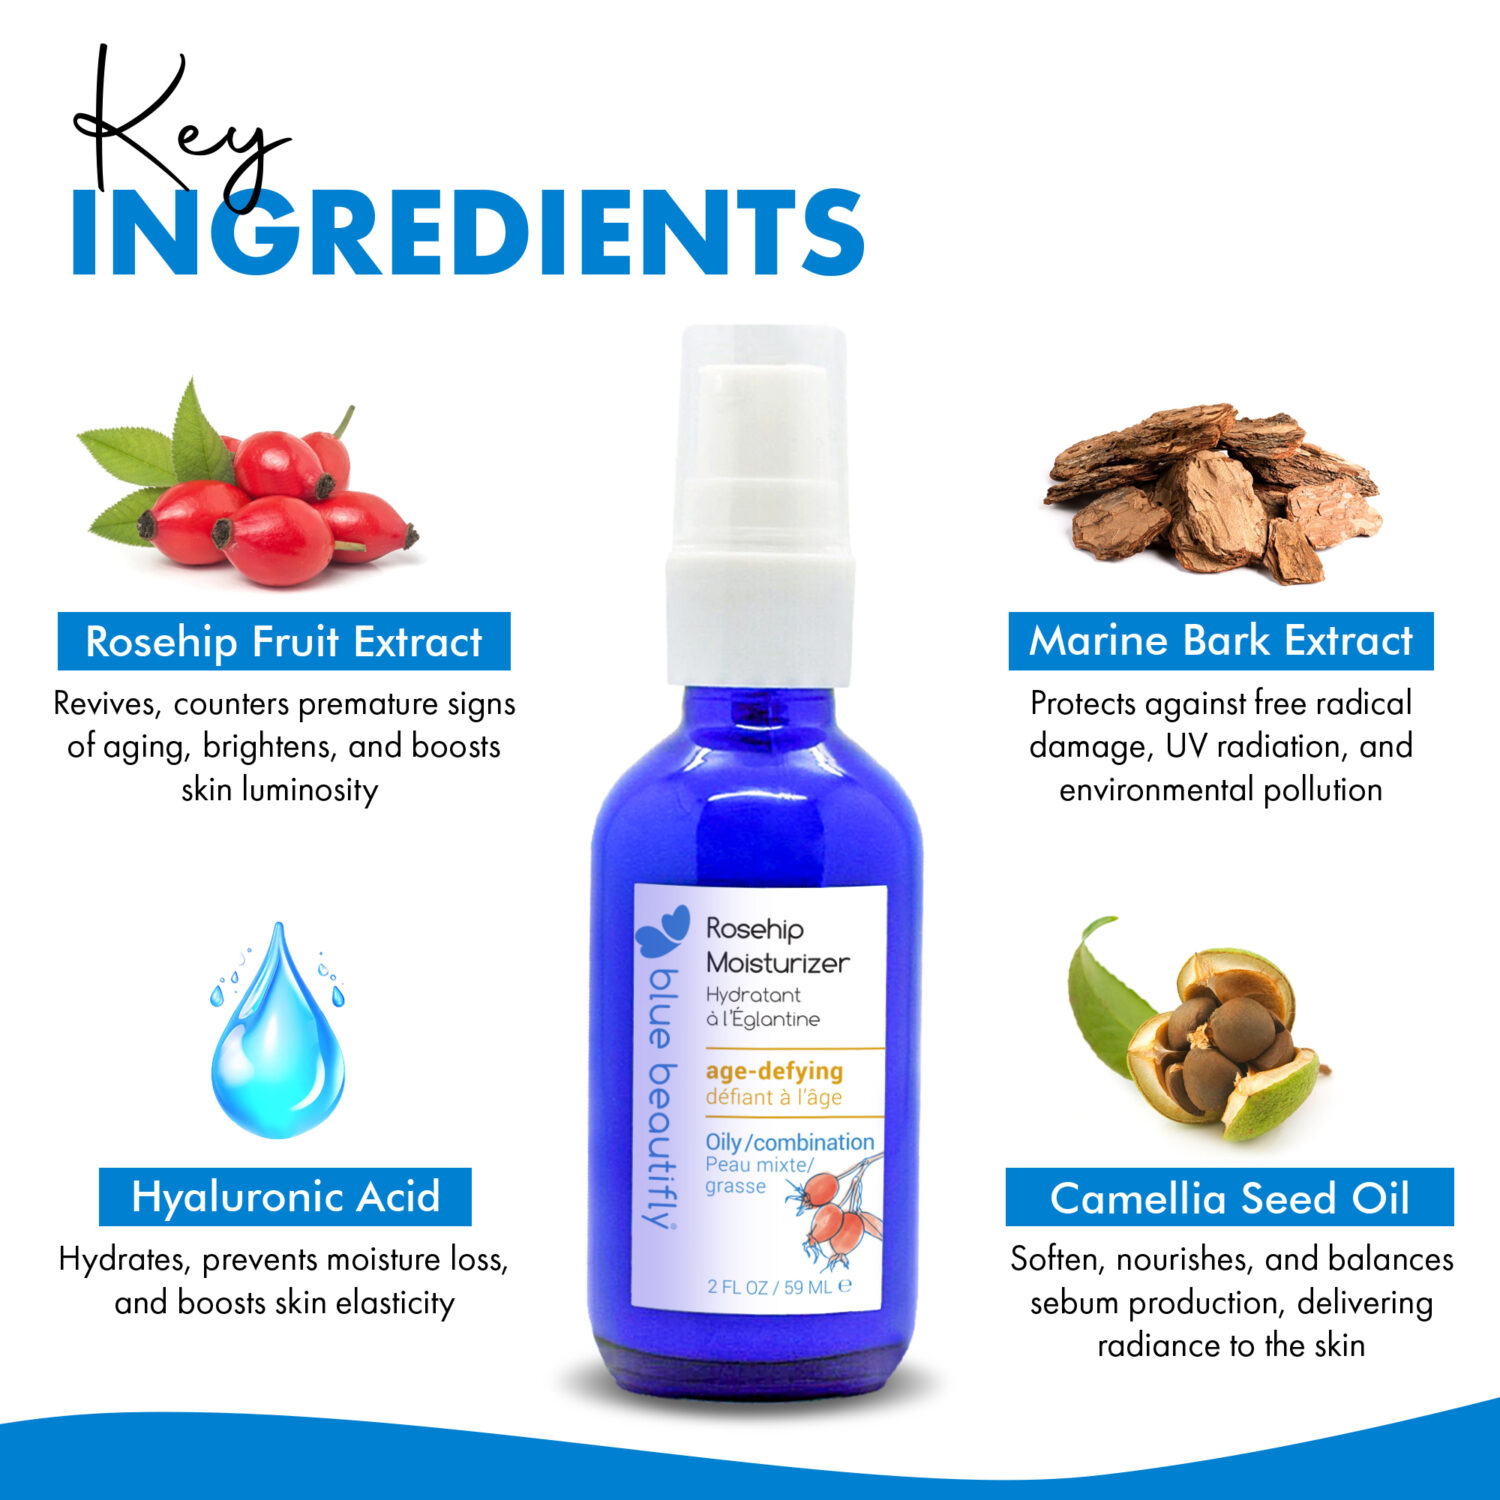 Blue Beautifly Rosehip Moisturizer key ingredients are rosehip fruit extract, marine bark extract, hyaluronic acid, and camellia seed oil